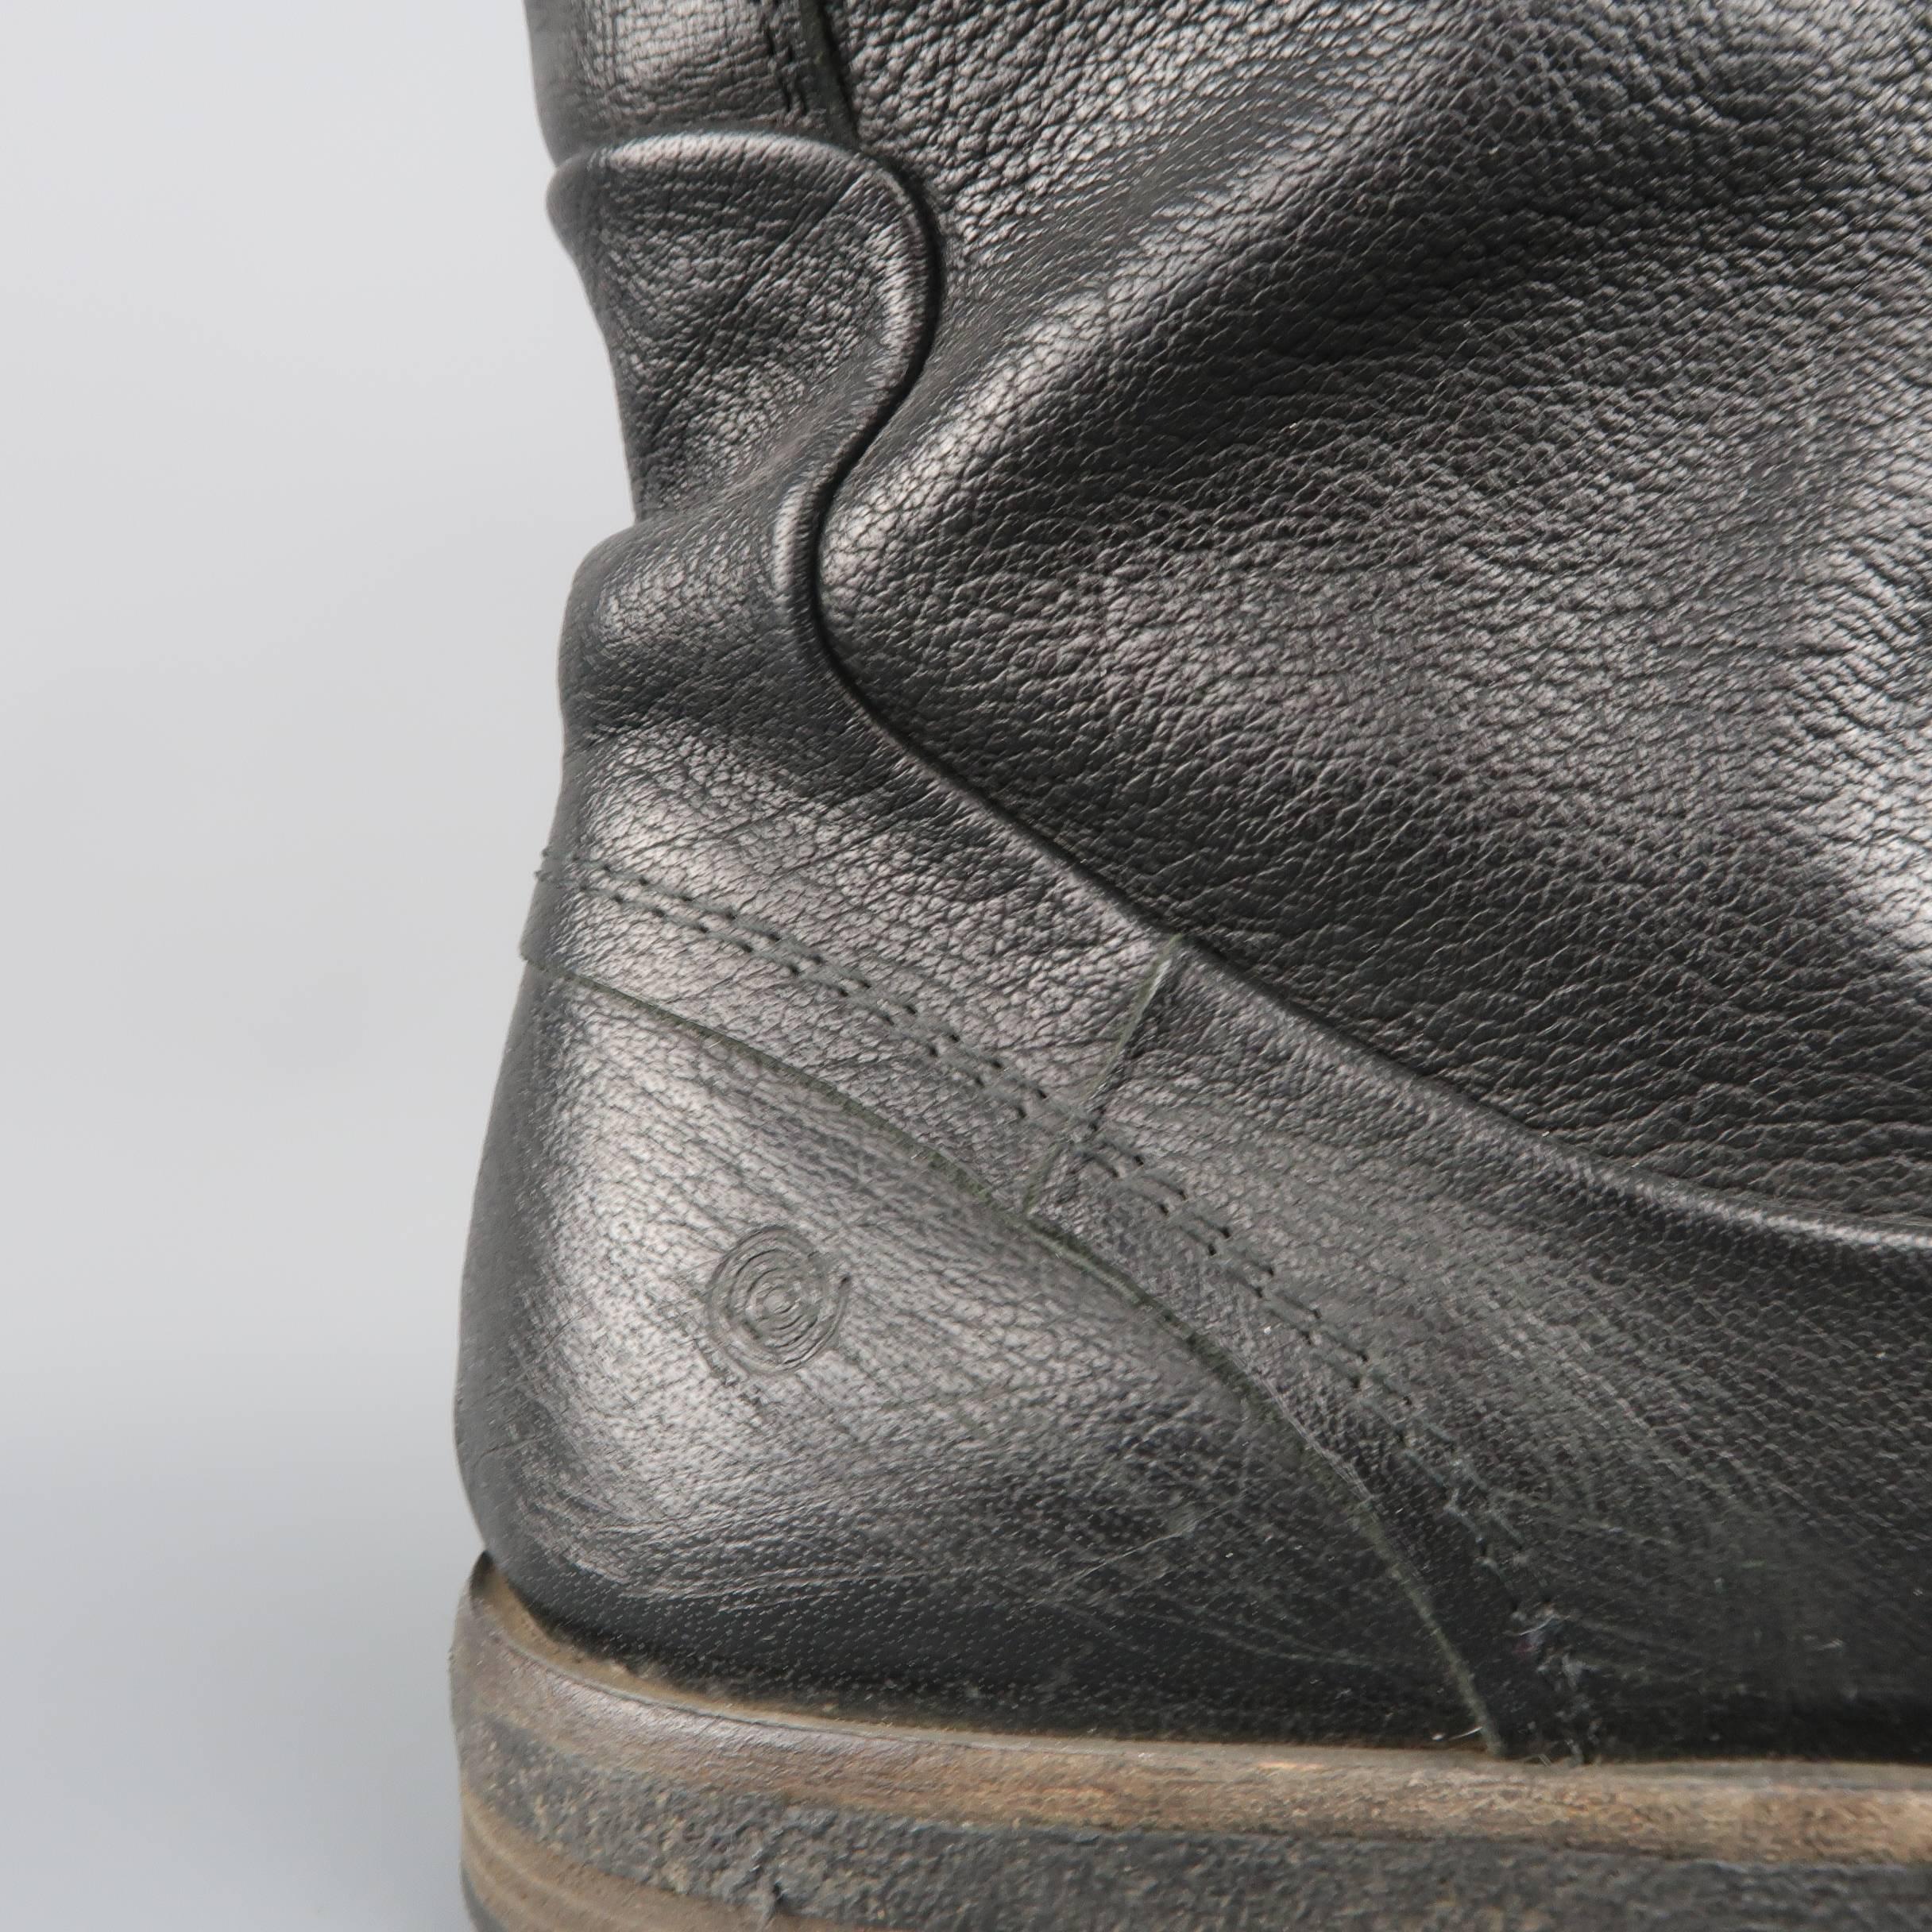 MARSELL biker style boots come in distressed black leather with a curved toe cap, crepe sole, internal zip, and knit shaft liner. Wear throughout. Made in Italy.
 
Fair Pre-Owned Condition.
Marked: (no size)
 
Outsole: 12 x 4.25 in.
Height: 10